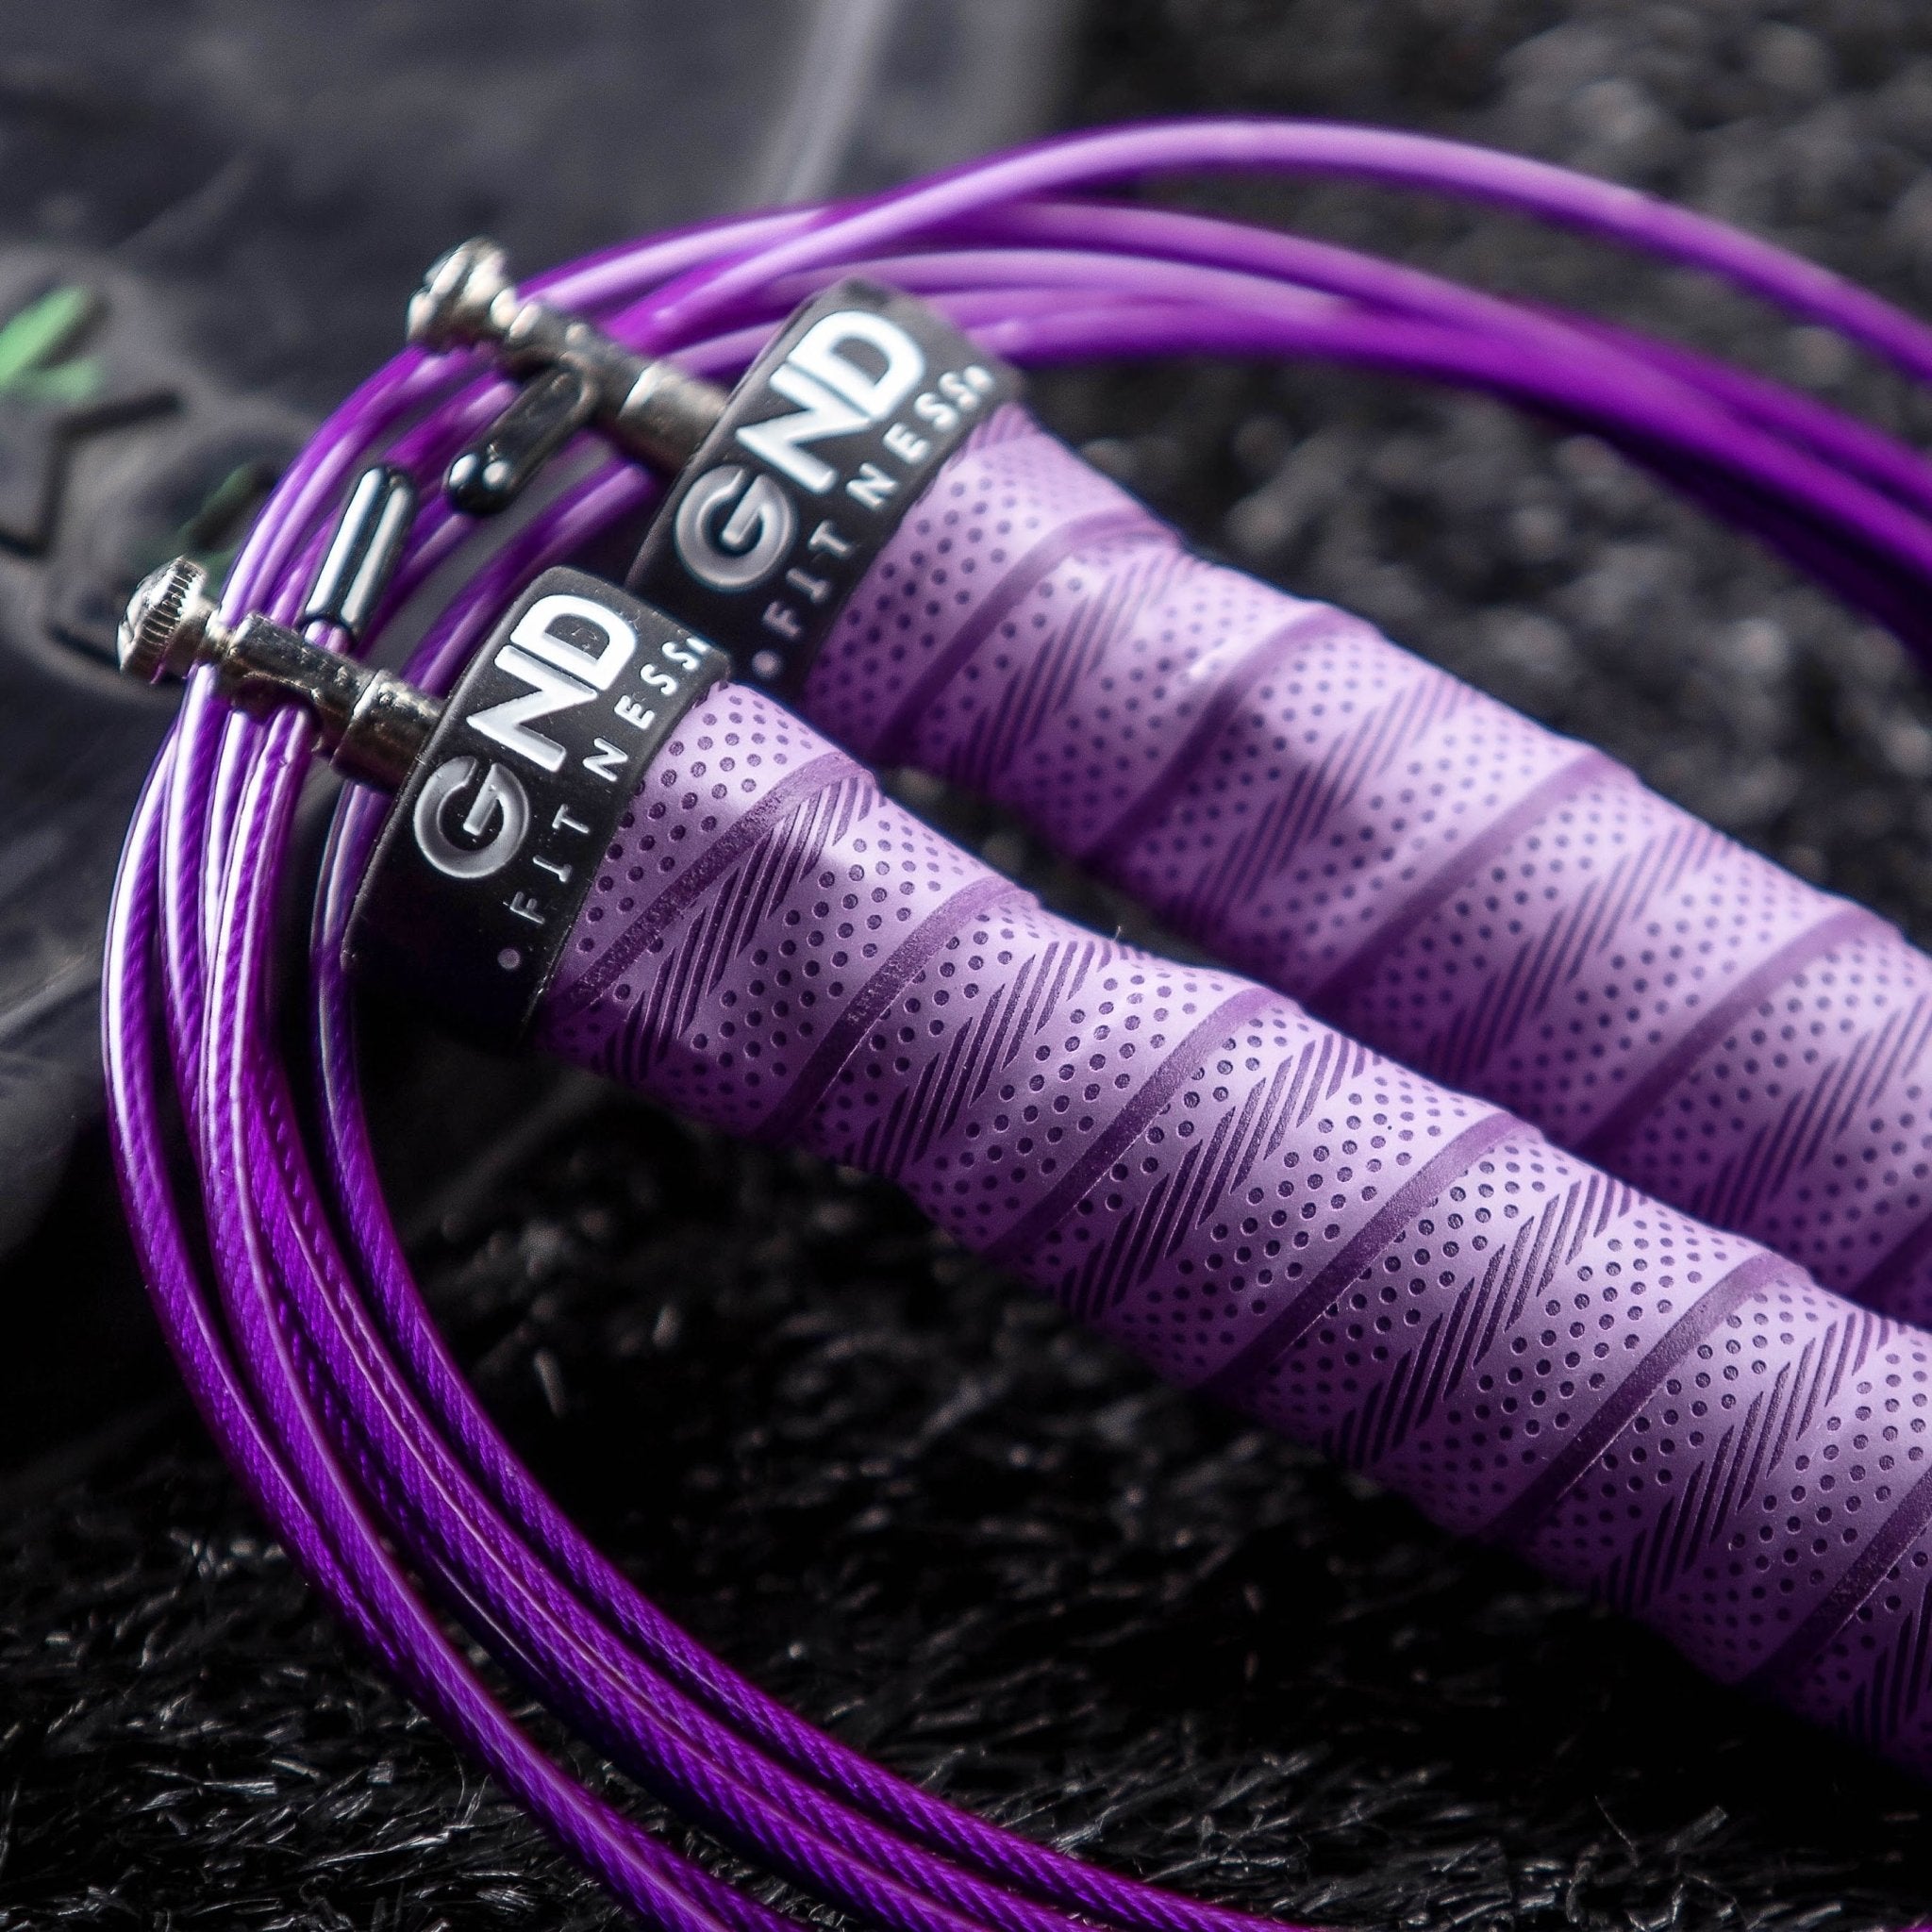 GND SR Speed Skipping Rope // Single Ball Bearing // Purple - SR Skipping Rope- GND Fitness